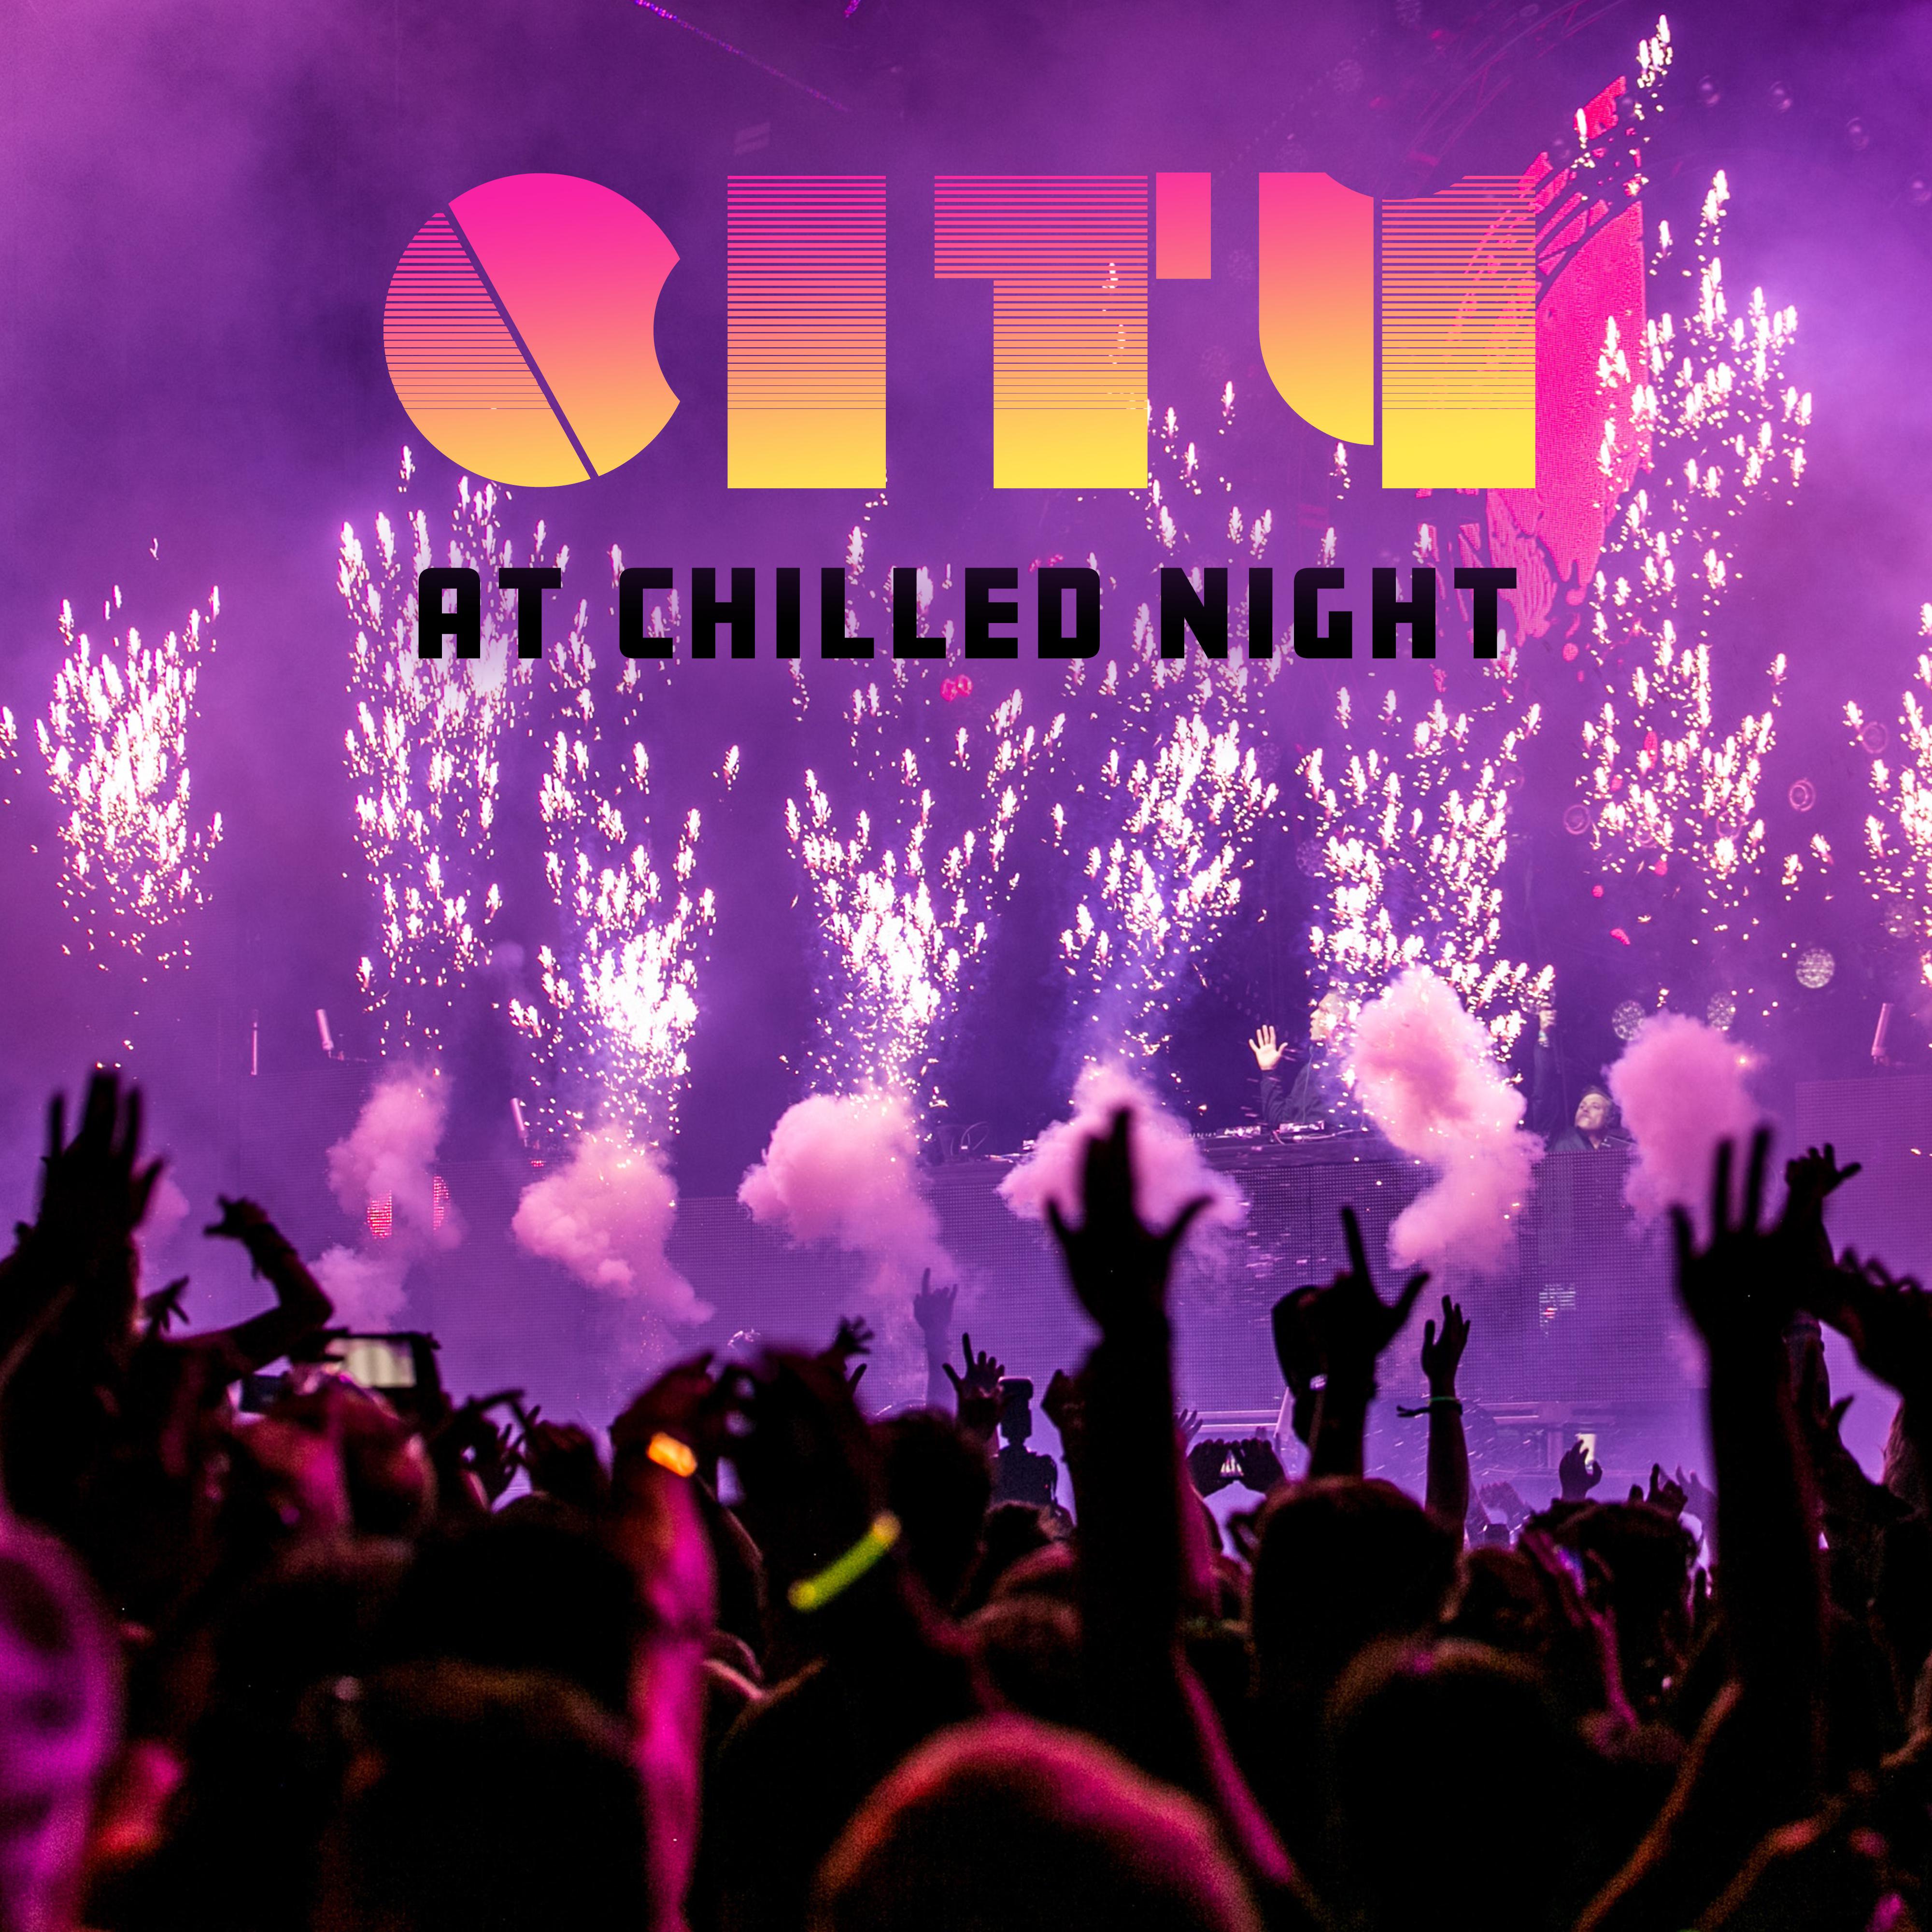 City at Chilled Night: 2019 Chillout Club Mix, Electronic Party Music Compilation, Beats for Dancing in the Discoteque, Spending Nice Relaxing Time with Friends